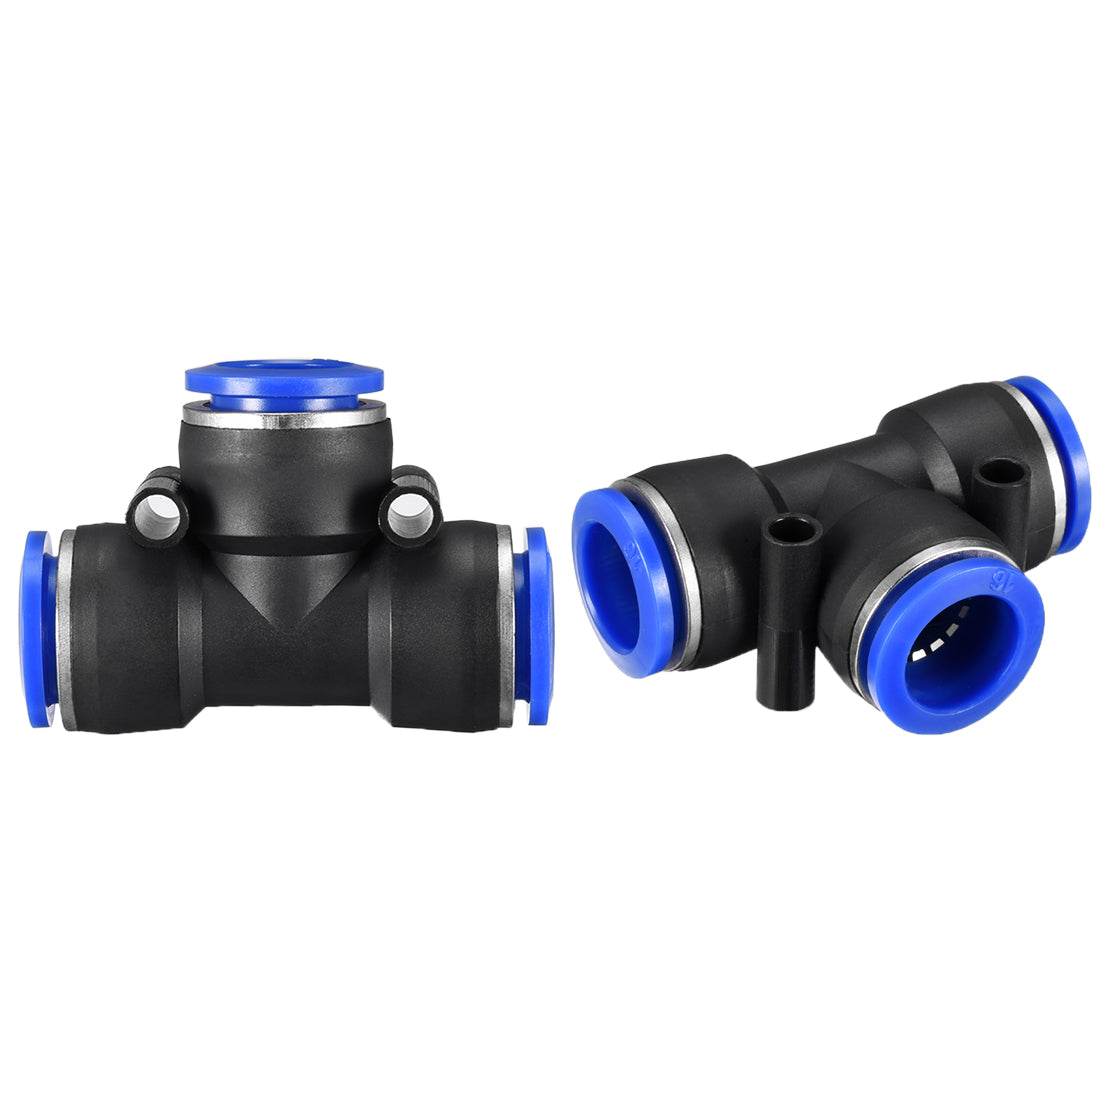 uxcell Uxcell 2pcs Push To Connect Fittings T Type Tube Connect 16mm or 5/8" od Push Fit Fittings Tube Fittings Push Lock Blue  (16mm T tee)